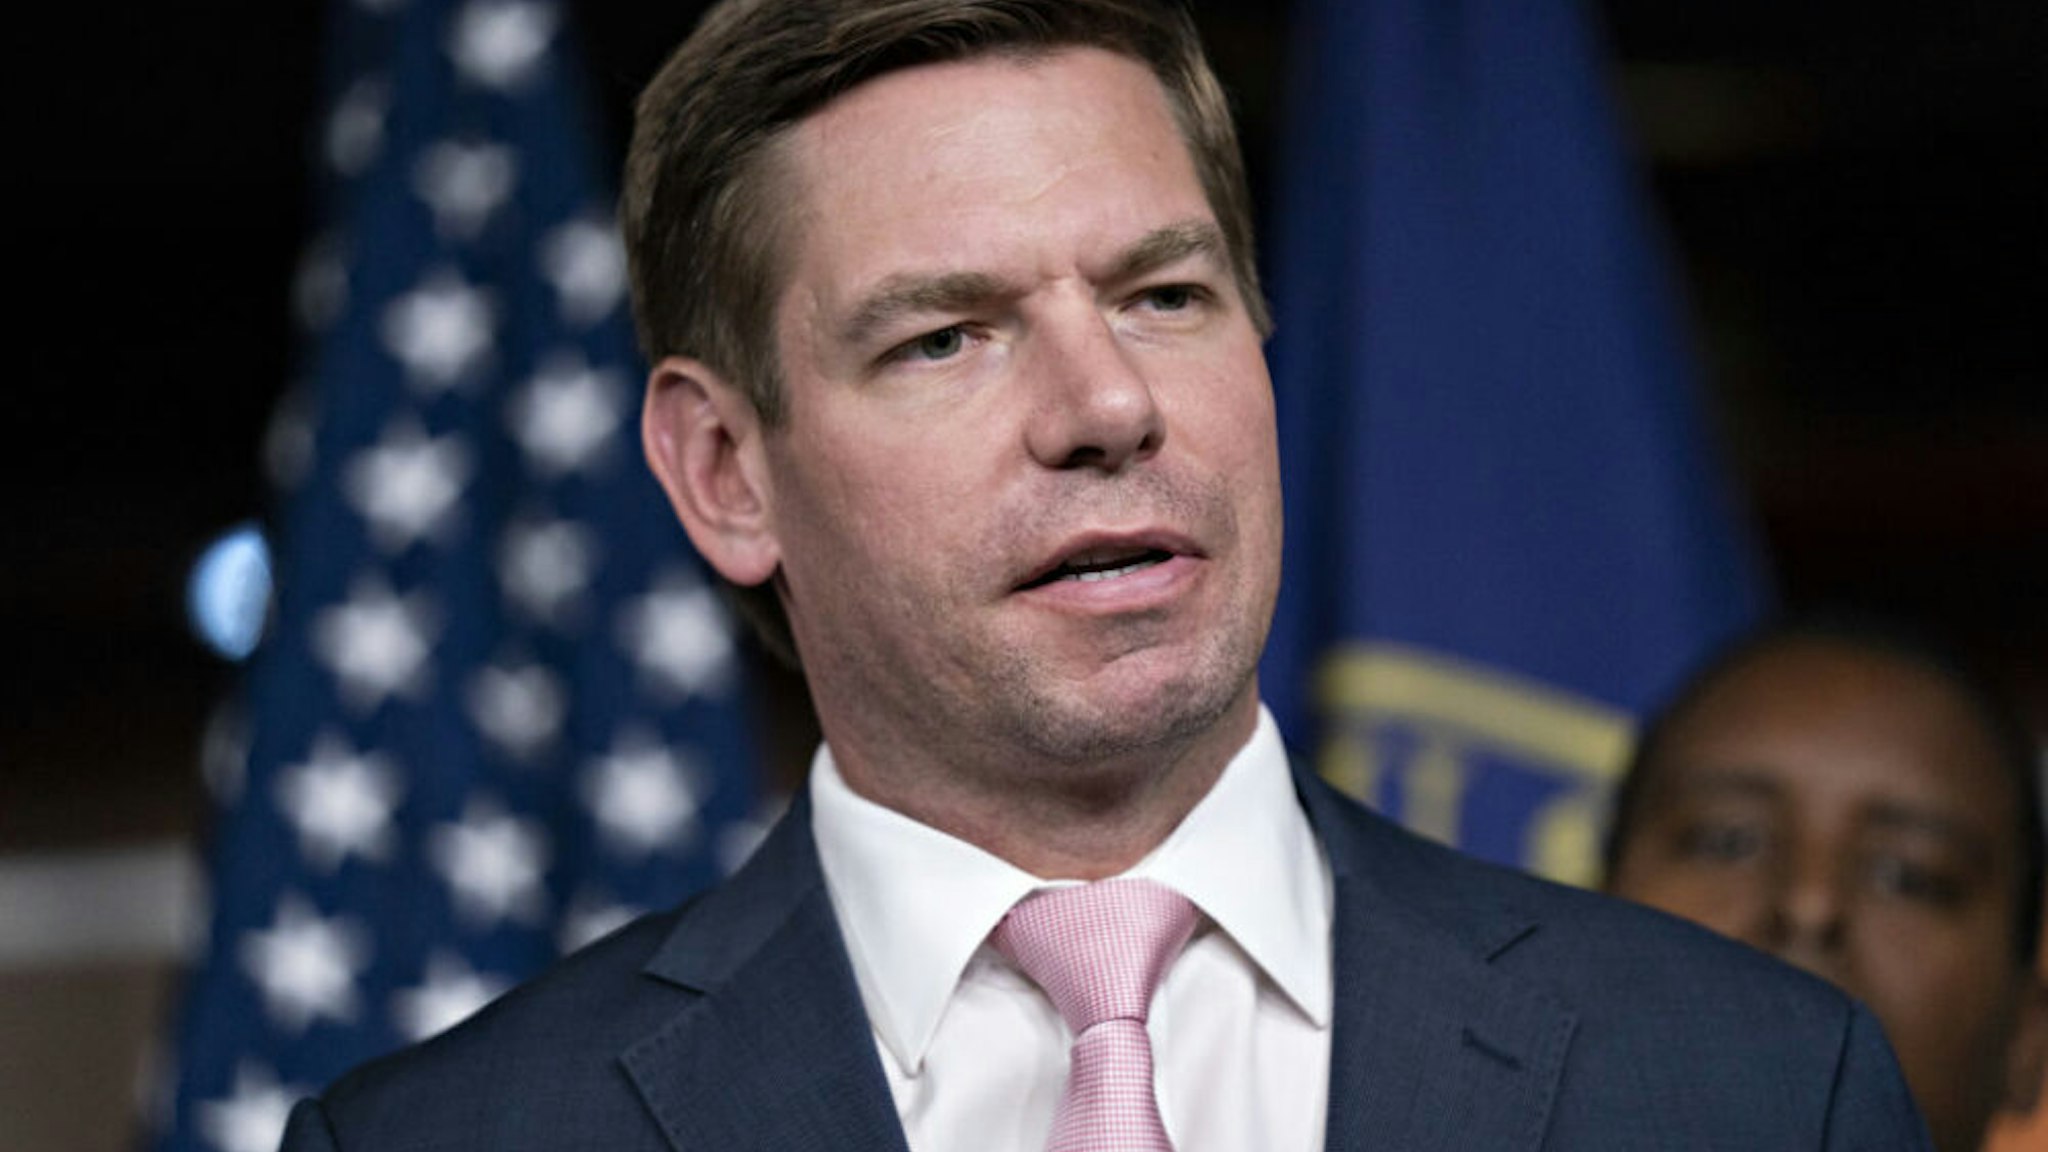 Representative Eric Swalwell, a Democrat from California, speaks during a news conference on Capitol Hill in Washington, D.C., U.S., on Friday, July 26, 2019. Raising the prospect of impeaching President Donald Trump, House Judiciary Chairman Jerrold Nadler said his panel will ask a federal court Friday to force release of grand jury information from Robert Mueller's investigation.